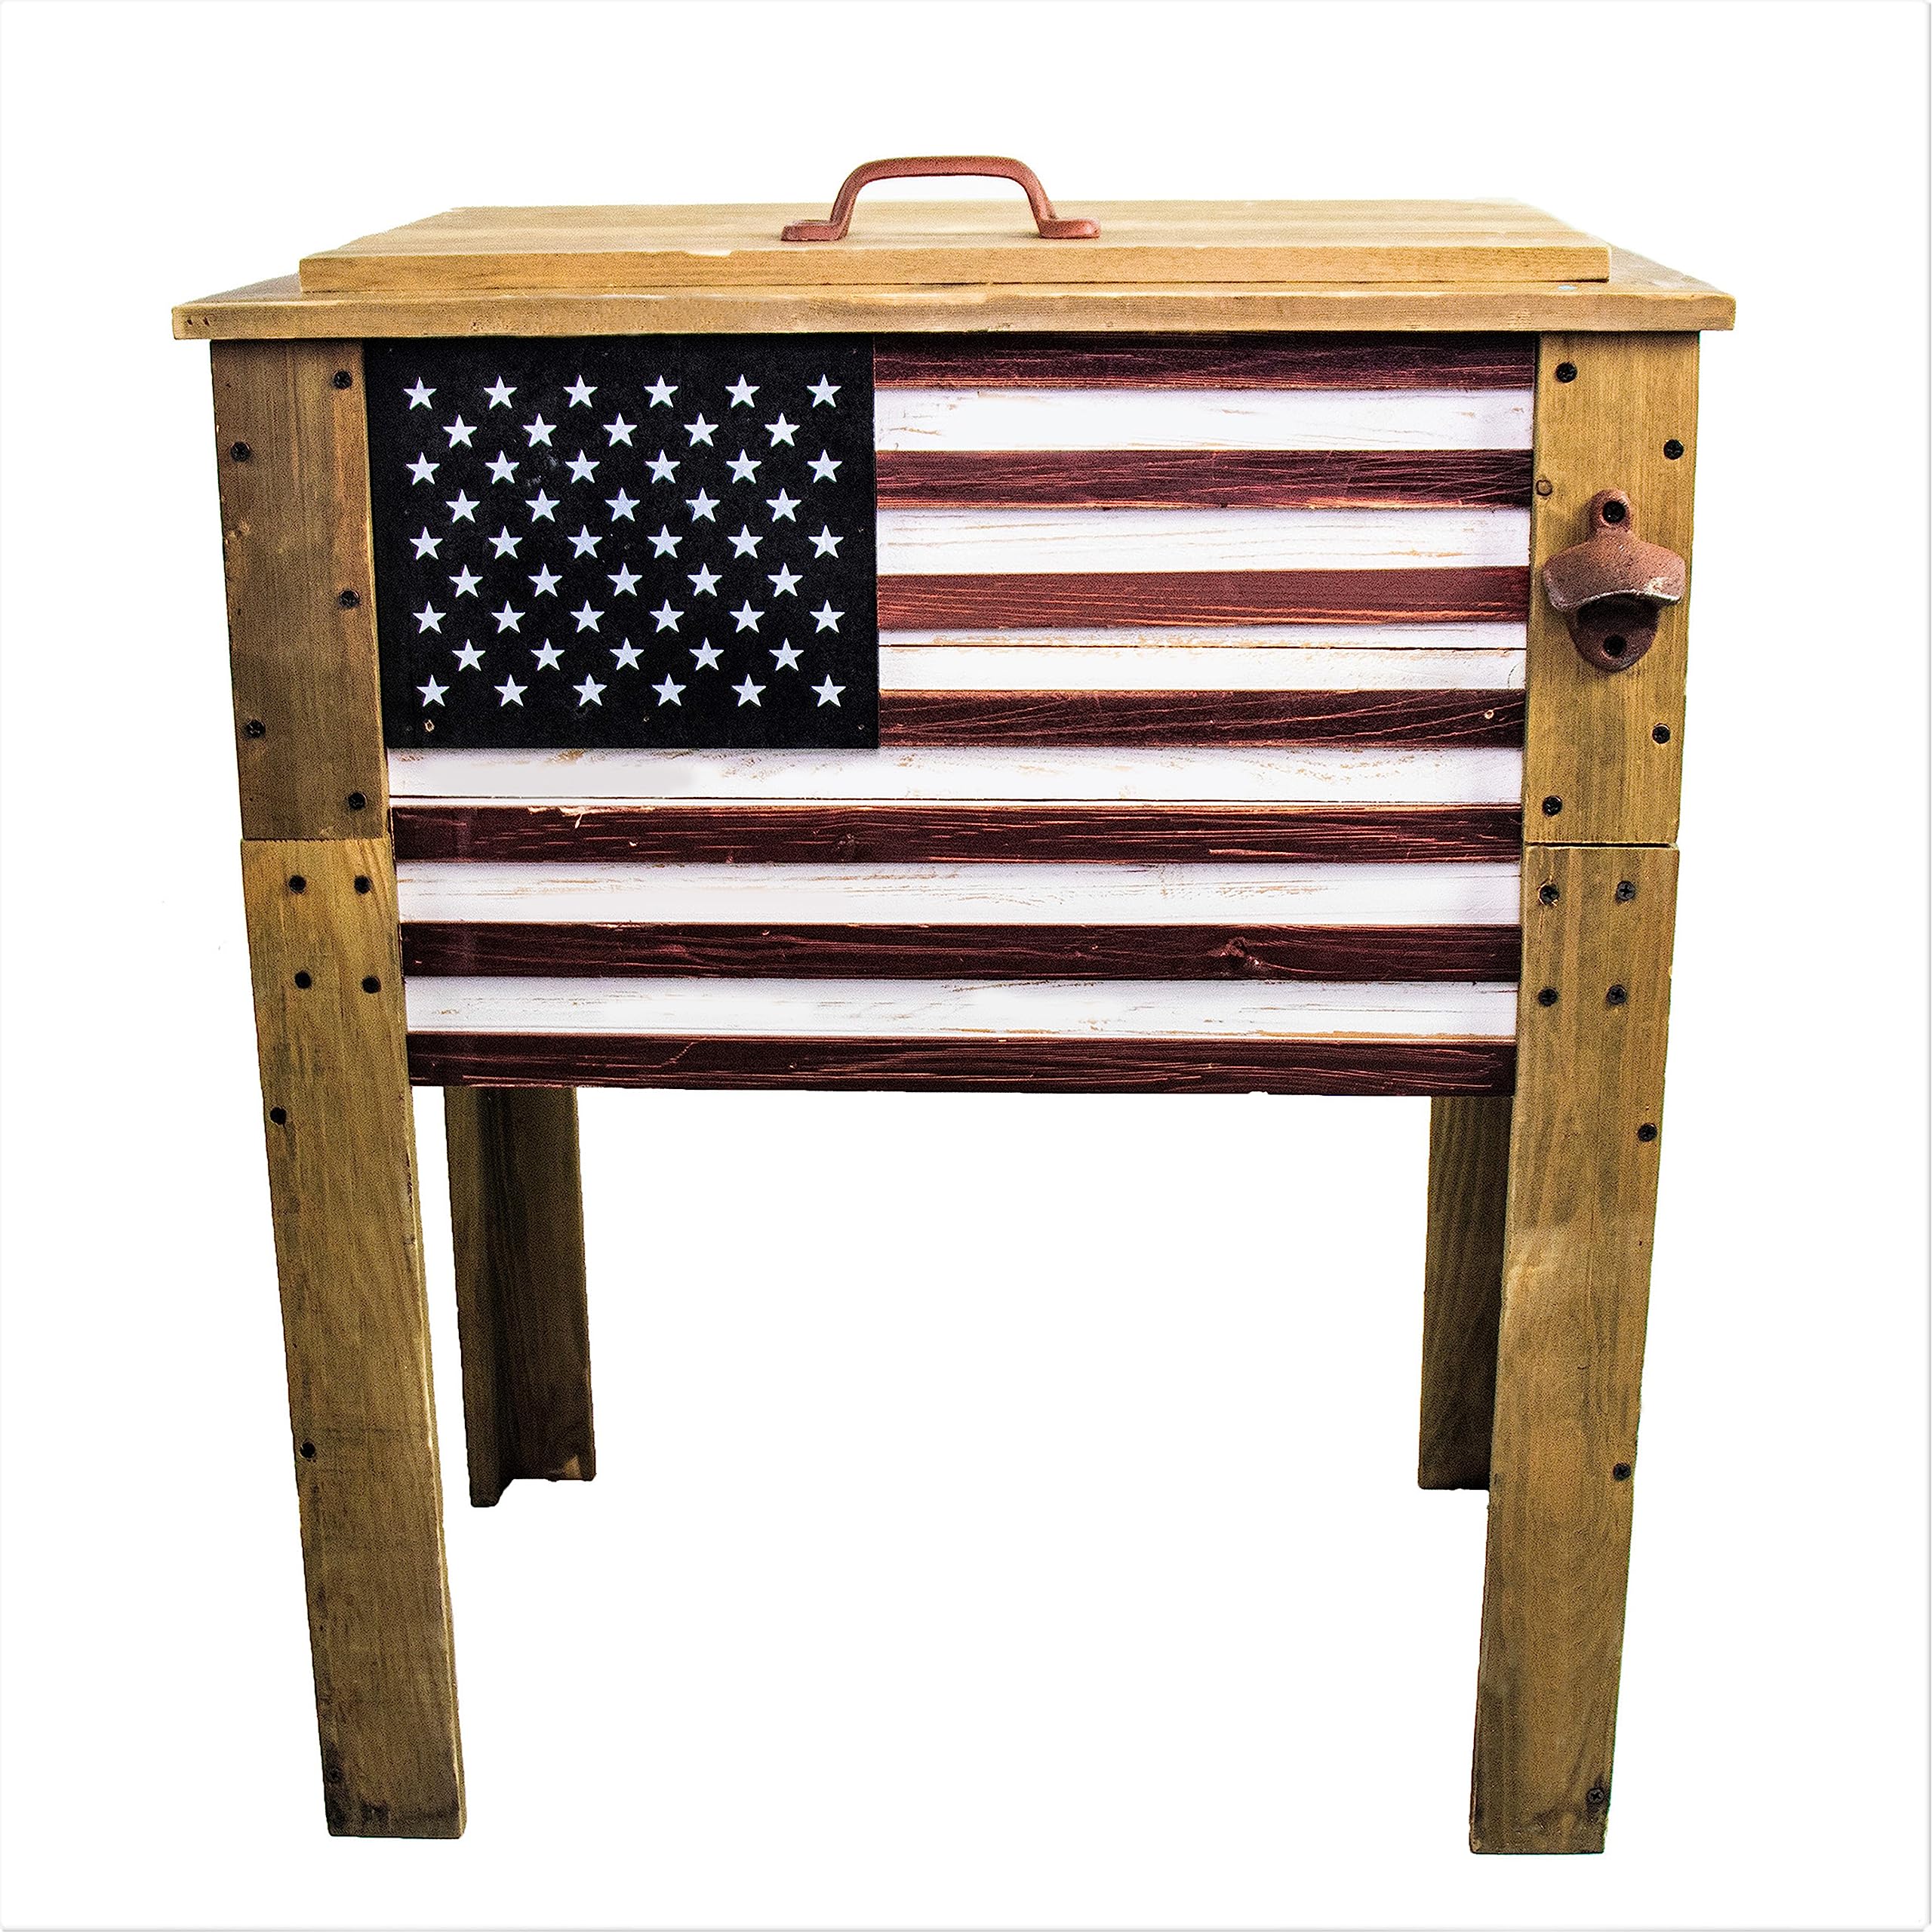 57-Quart Backyard Expressions American Flag Wooden Patio Beverage Cooler $73.25 + Free Shipping